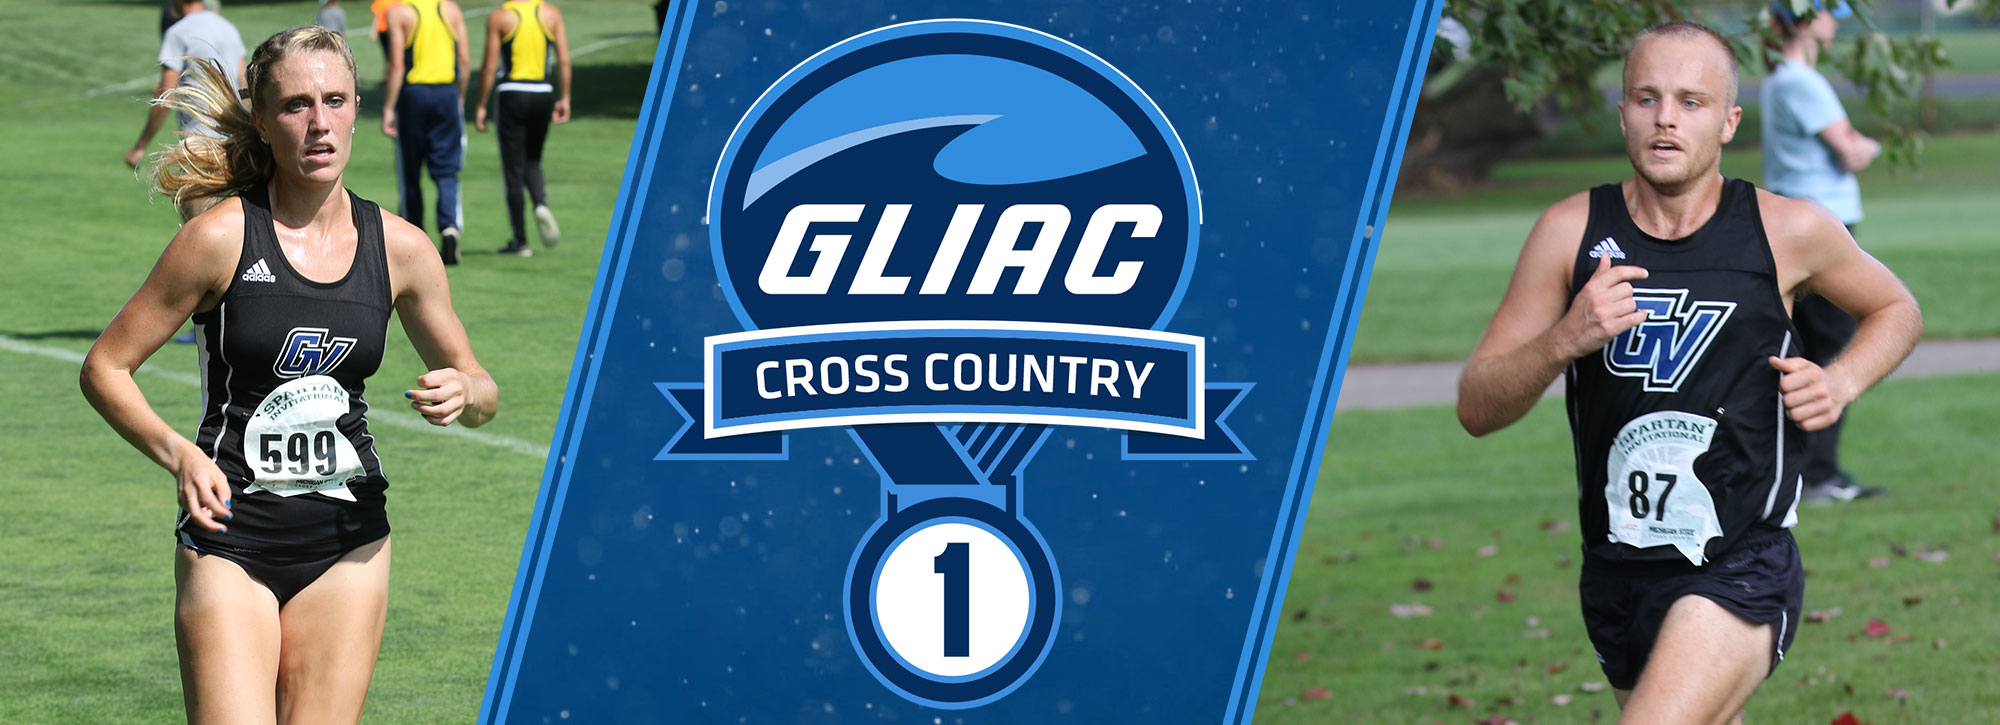 GVSU's Panning & Berger Sweep GLIAC Cross Country Athlete of the Week Recognition; Berger Claims National Honors